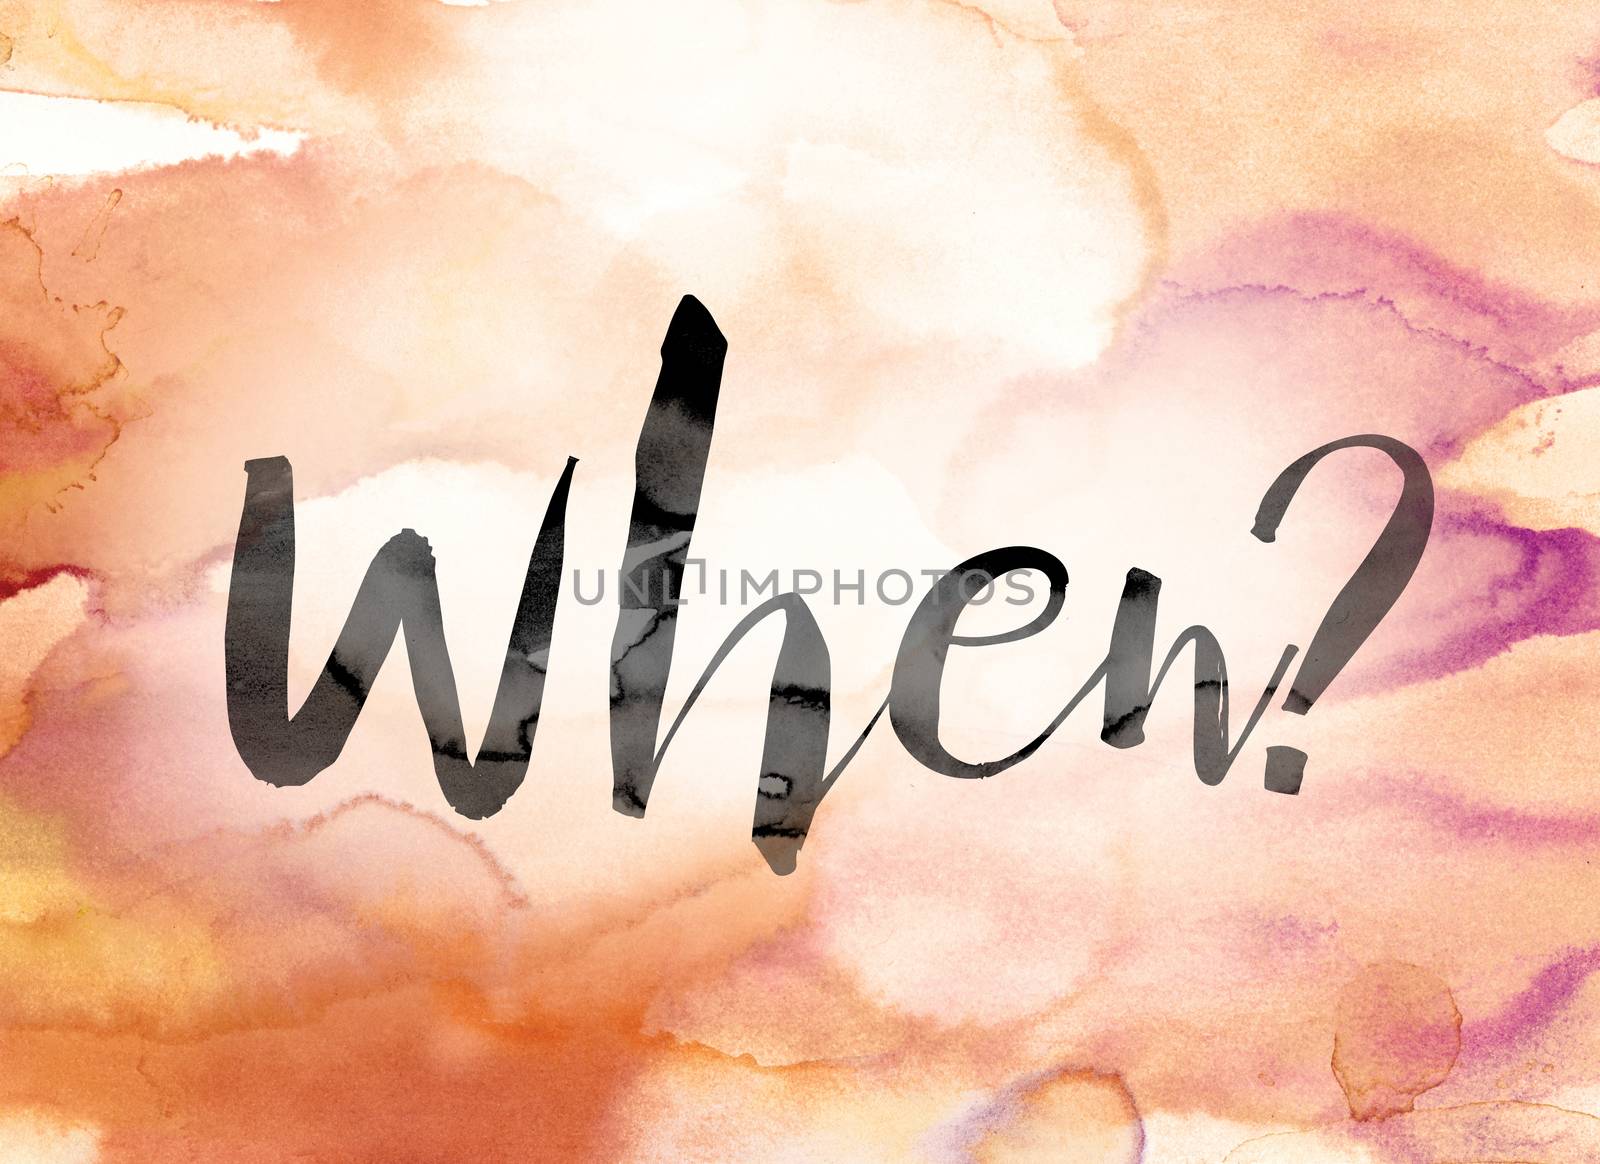 The word "When" painted in black ink over a colorful watercolor washed background concept and theme.